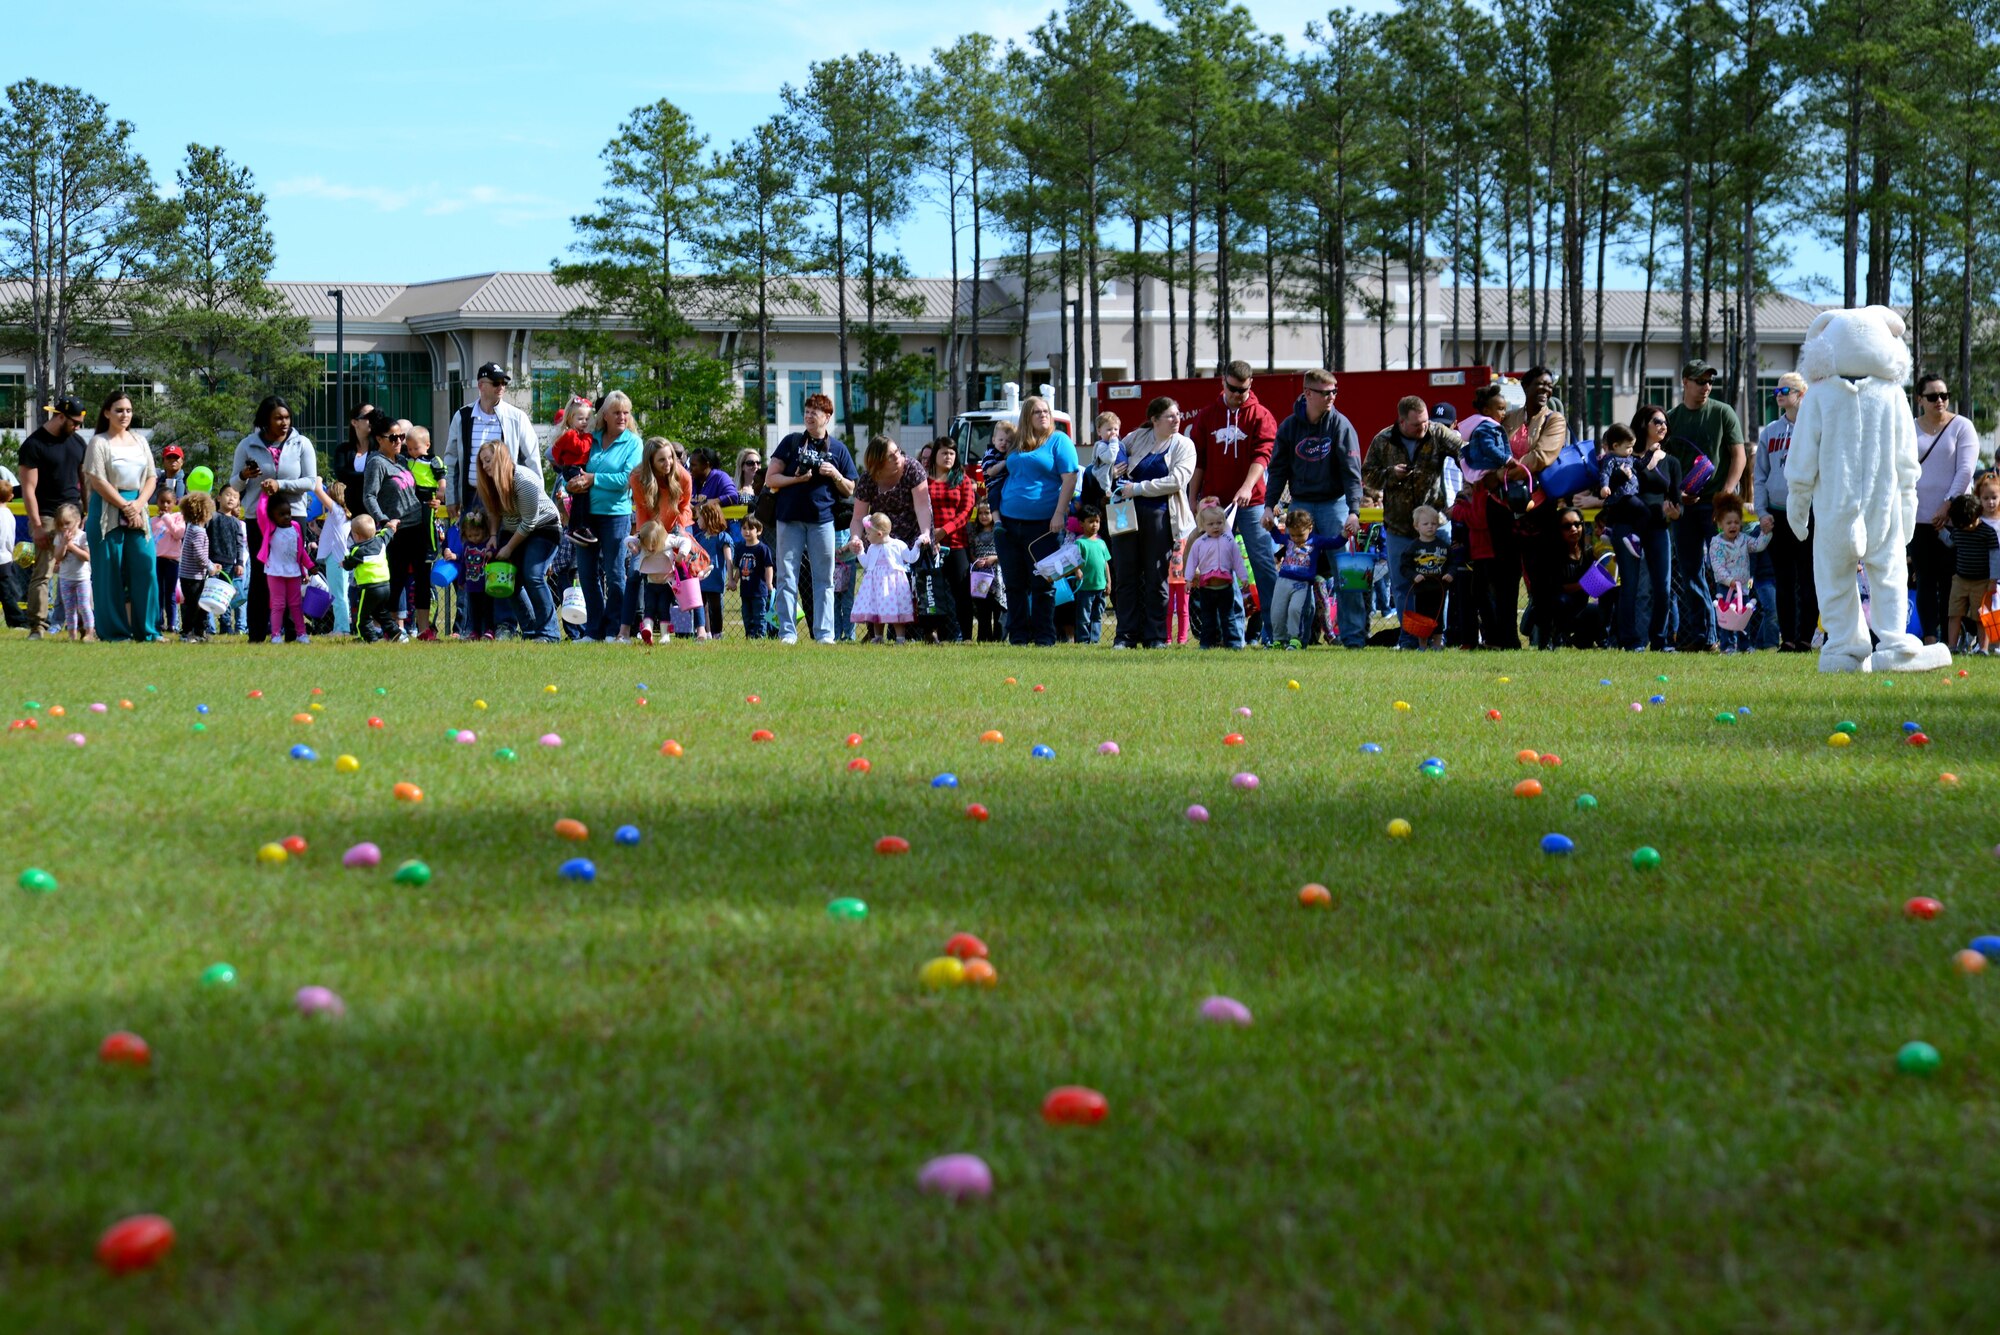 Team Shaw members gather before an egg hunt during a Month of the Military Child celebration at Shaw Air Force Base, S.C., April 8, 2017. Children participating in the hunt were given the opportunity to socialize with other children their age while also spending time having fun with family members. (U.S. Air Force photo by Airman 1st Class Kathryn R.C. Reaves)